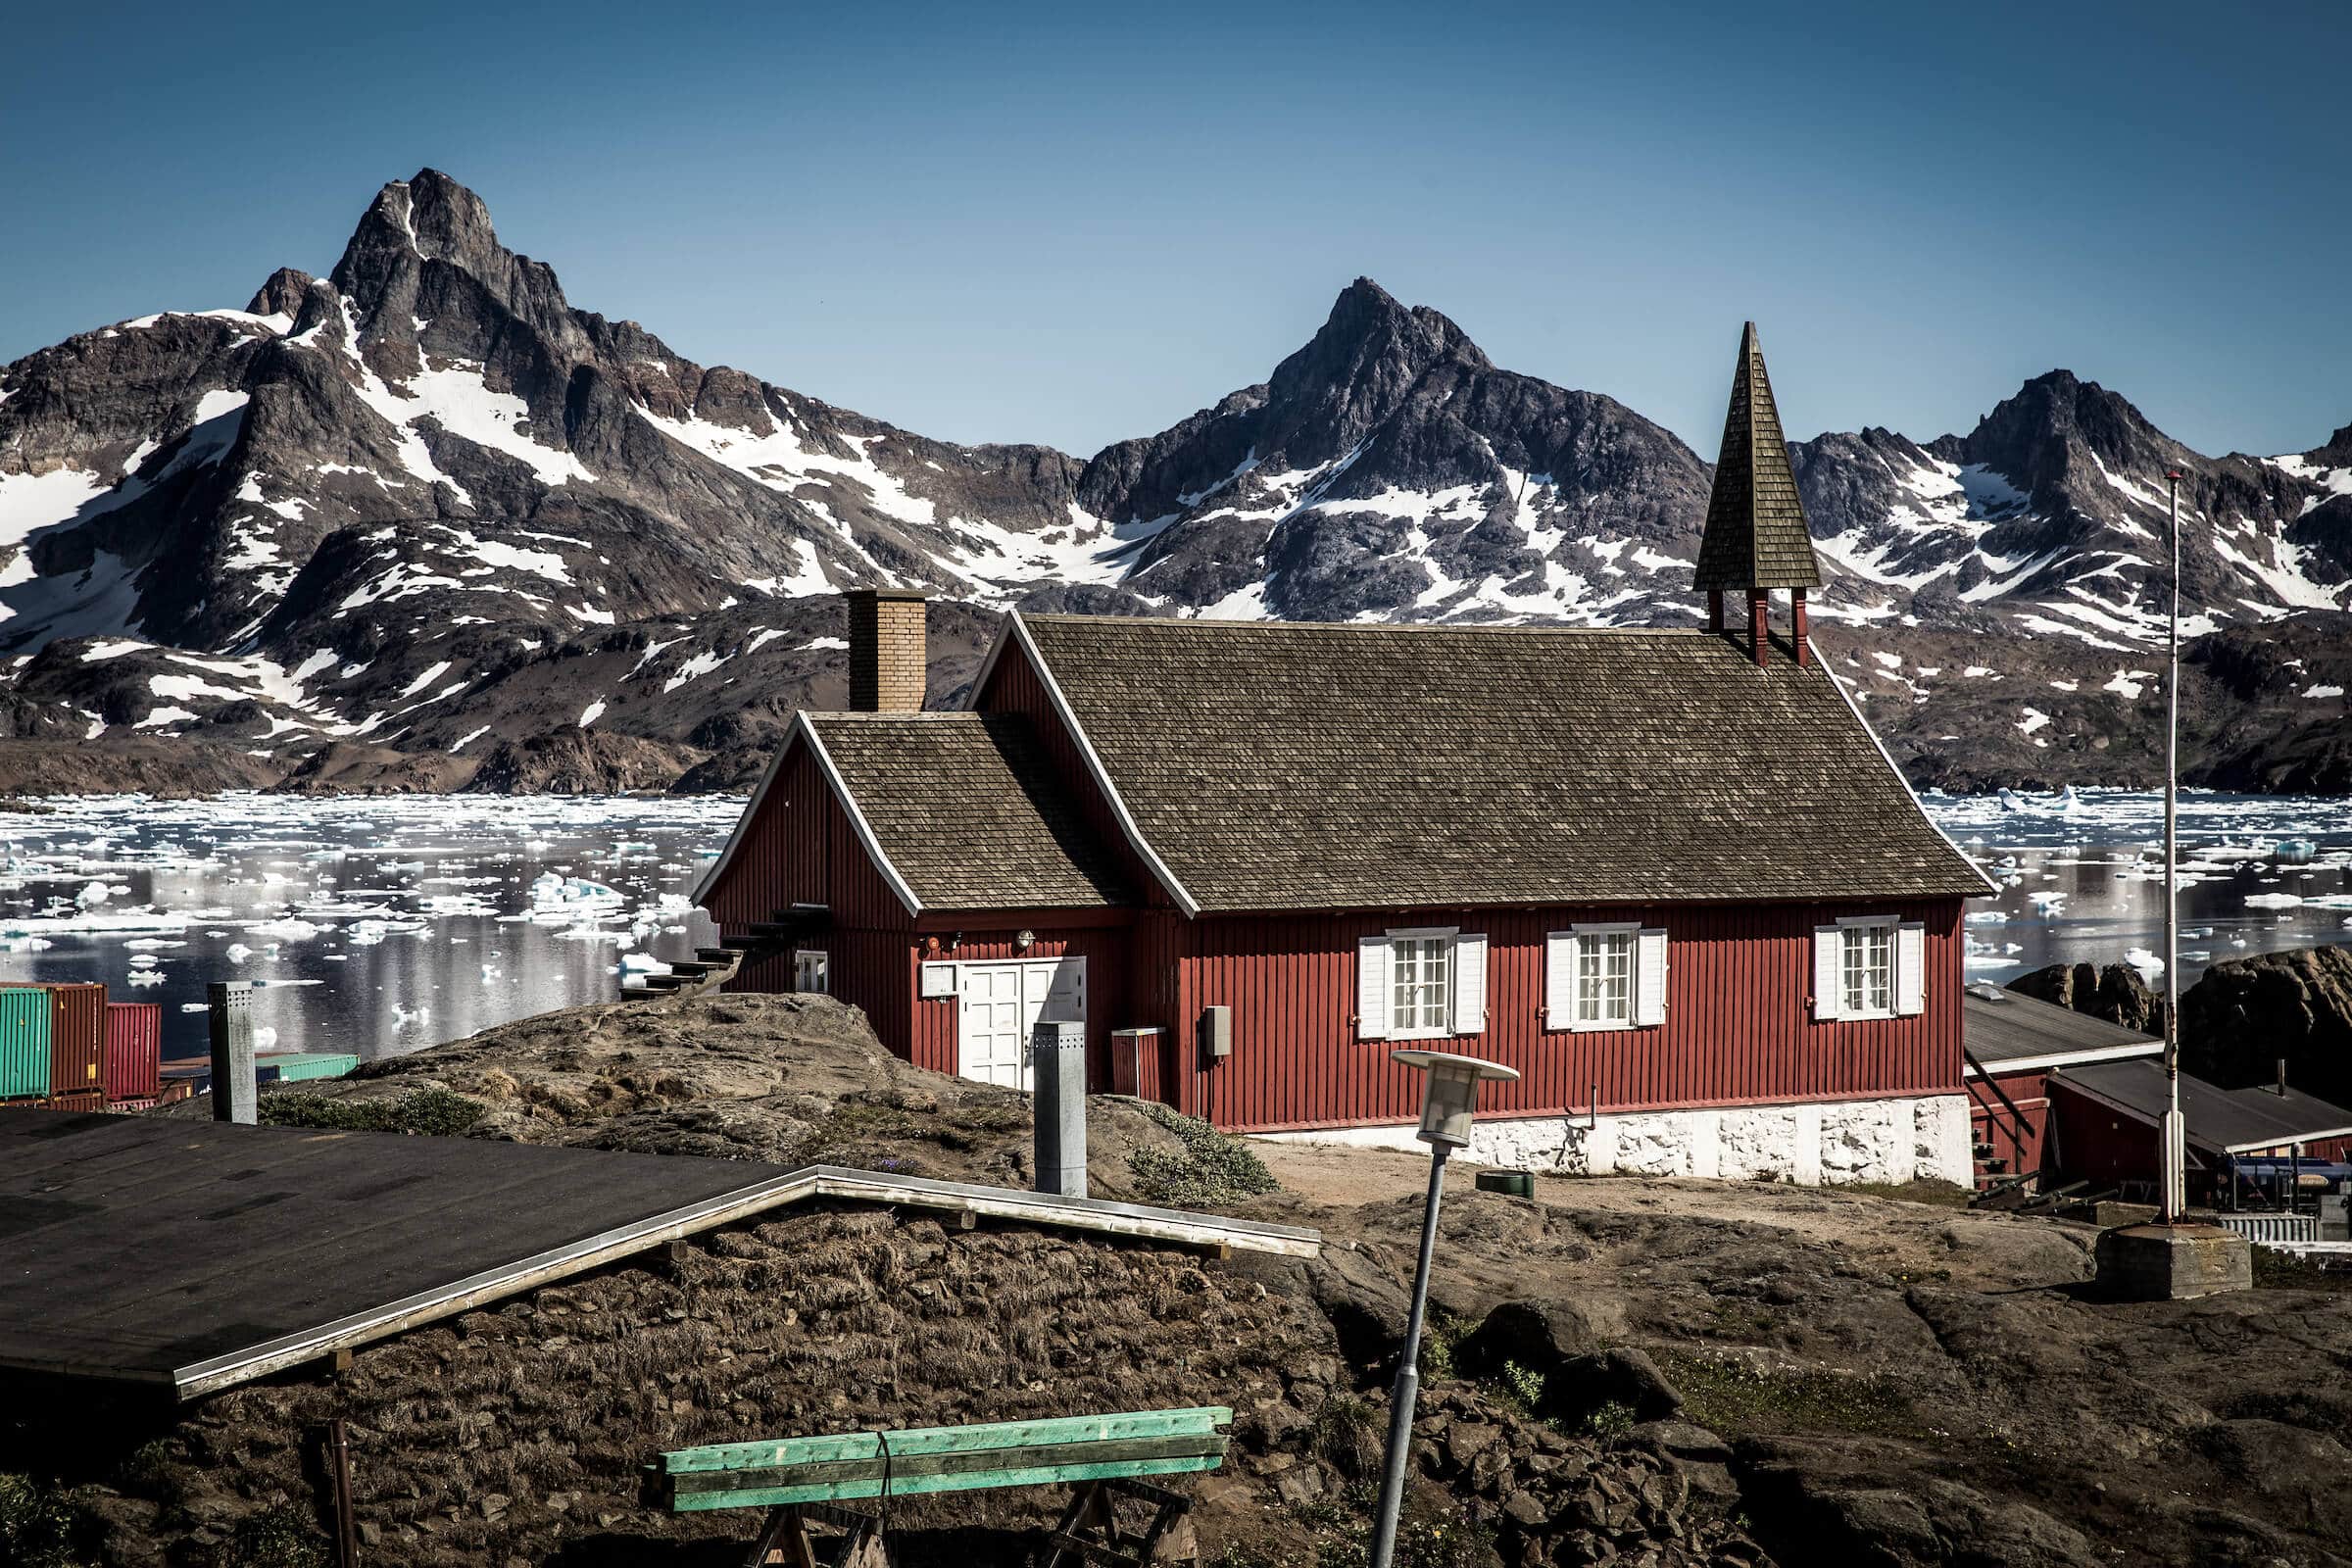 Tasiilaq Museum in the old church in Tasiillaq, East Greenland. By Mads Pihl